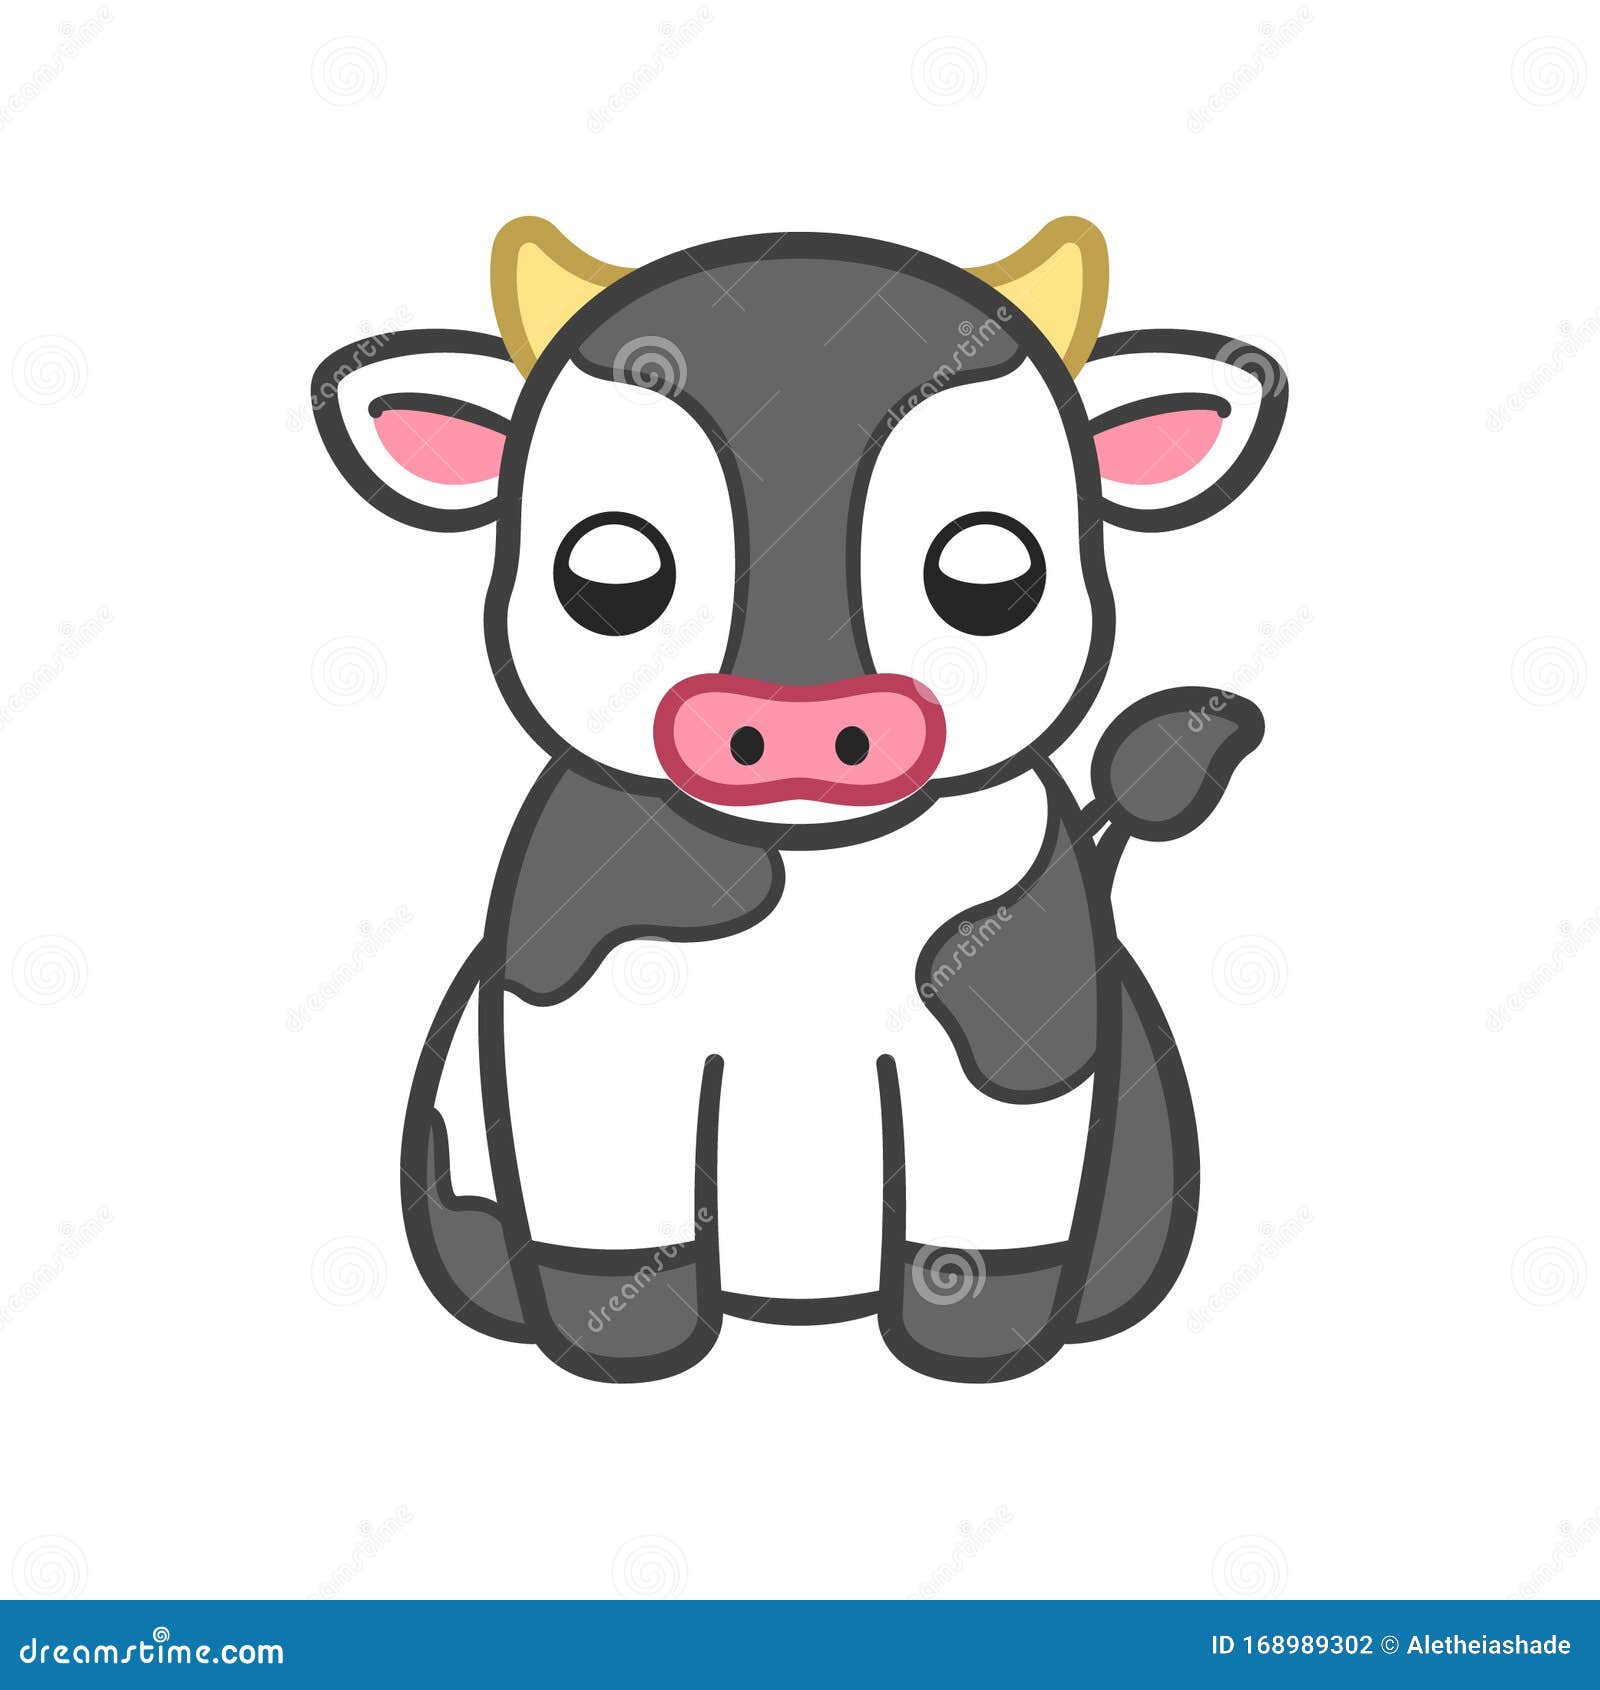 Cute Baby Cow Svg Layered Svg Cut File Free Fonts And Popular